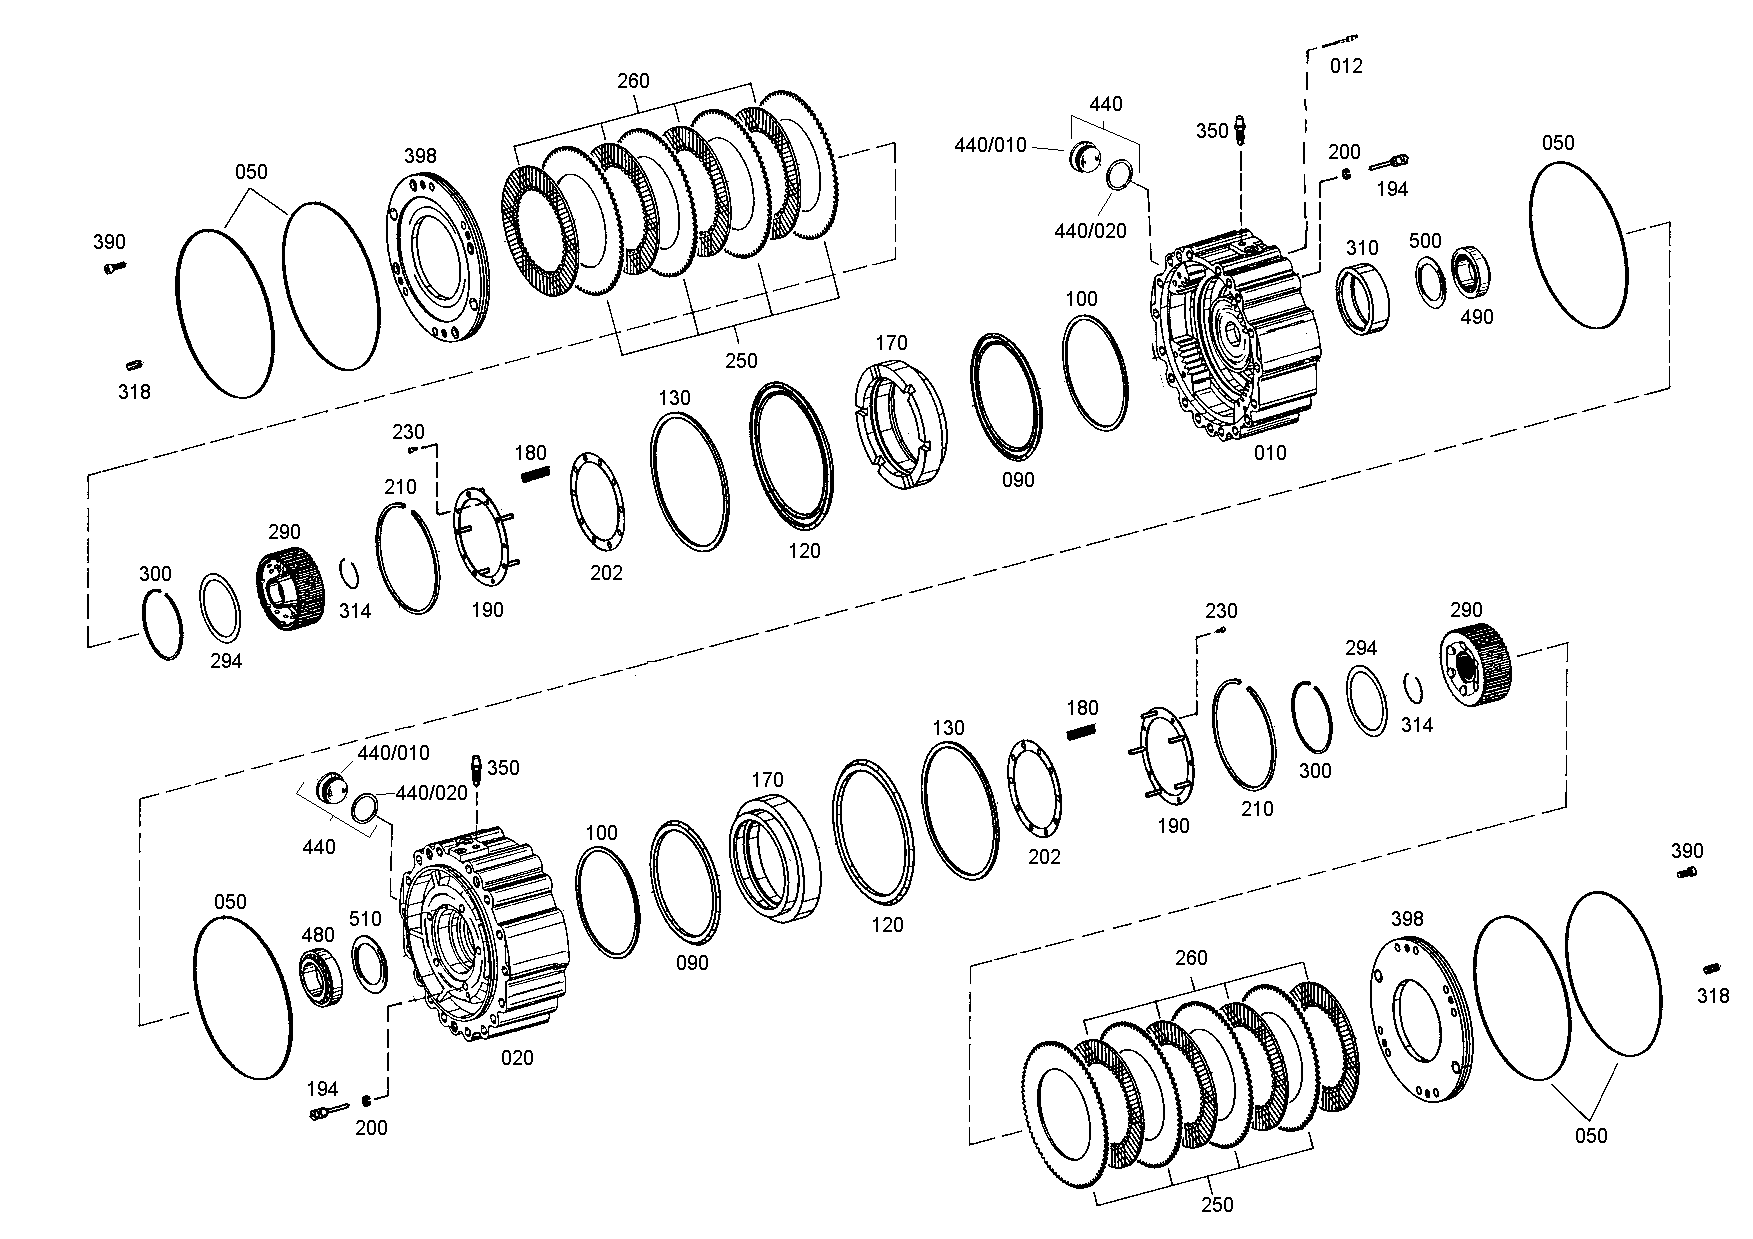 drawing for NACCO-IRV 0362099 - WASHER (figure 5)